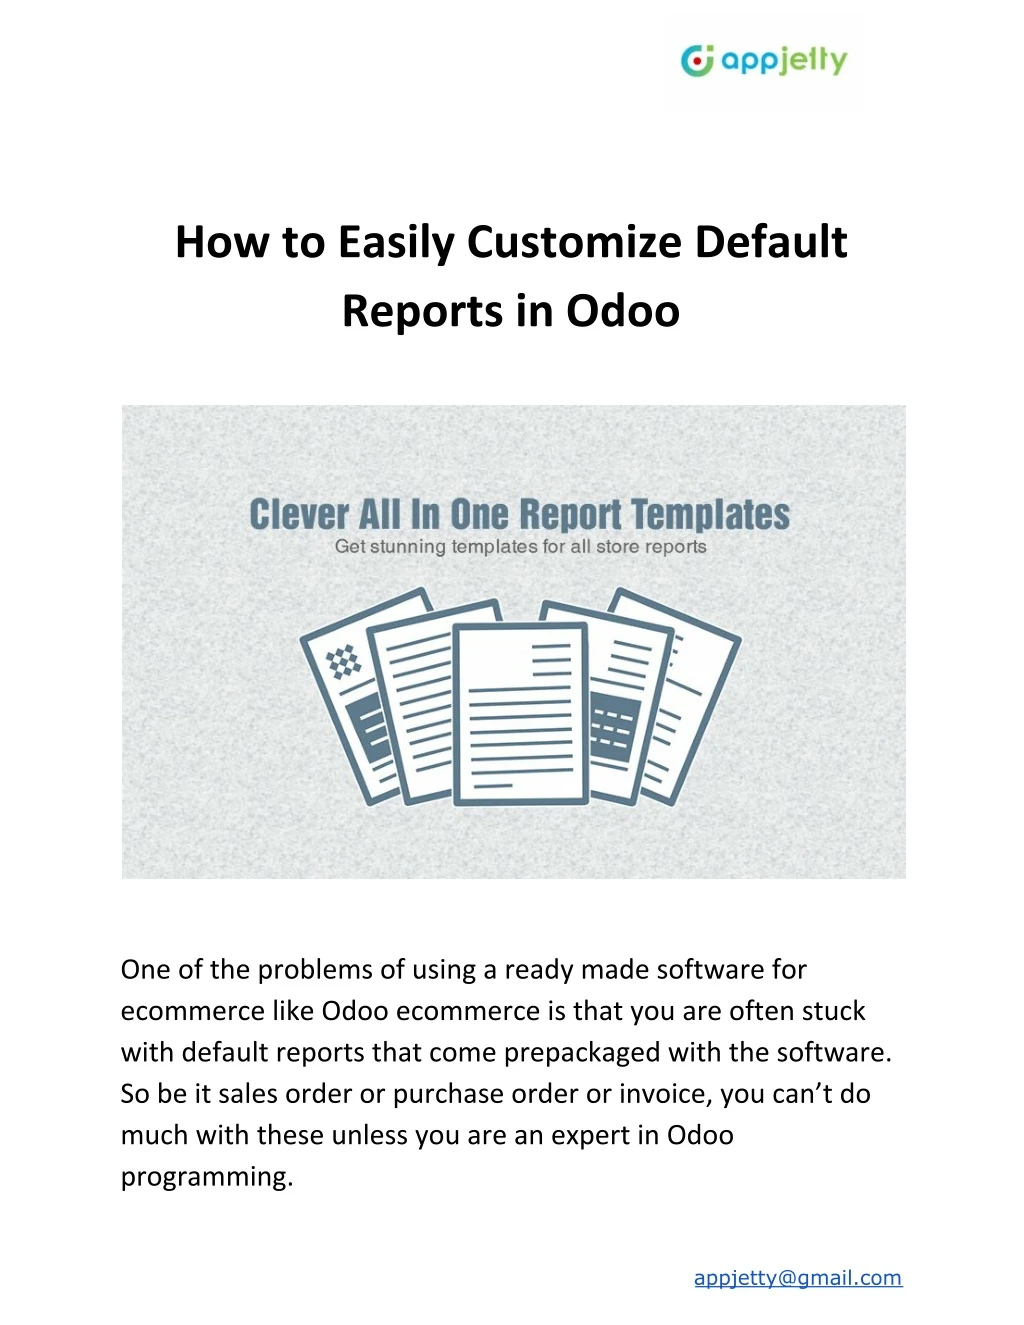 how to easily customize default reports in odoo